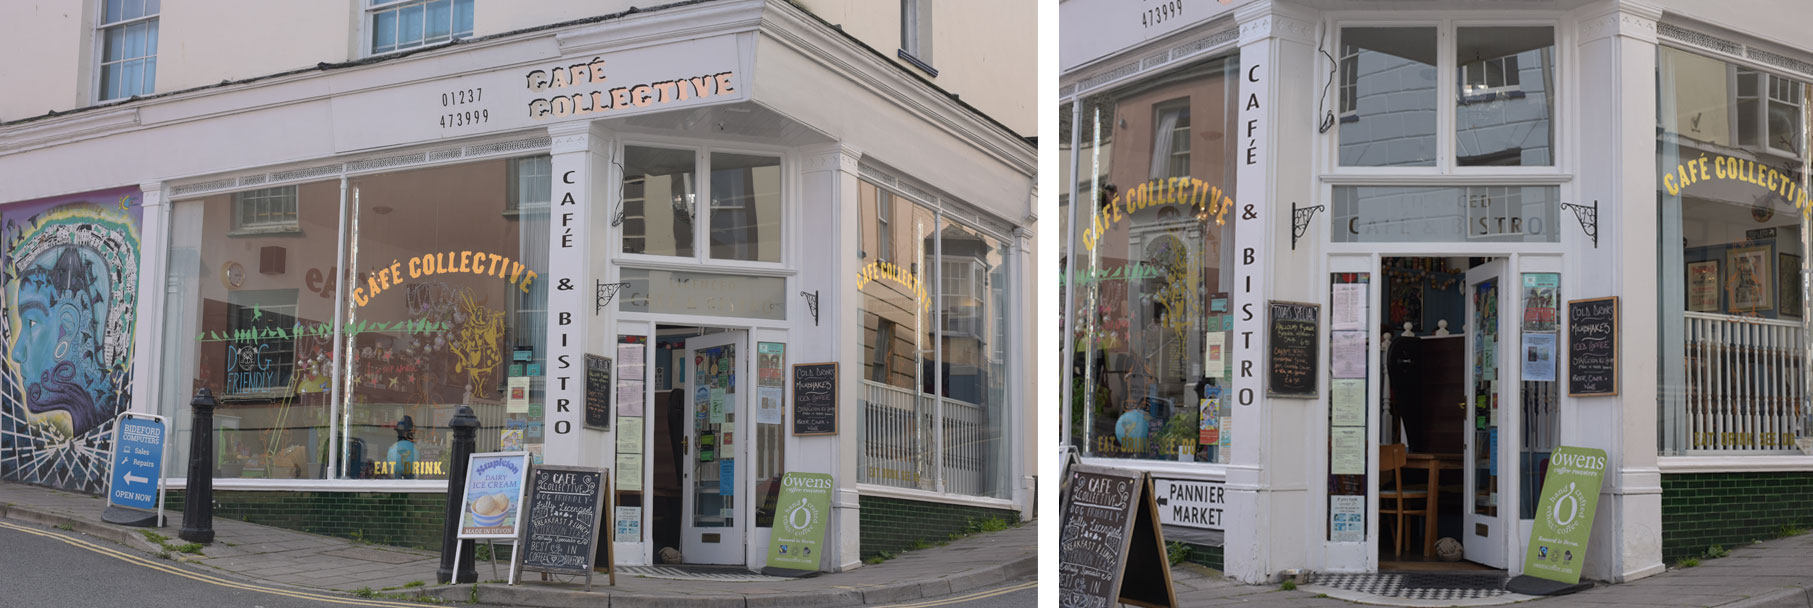 Photos of Townscapes at Cafe Collective - Bideford